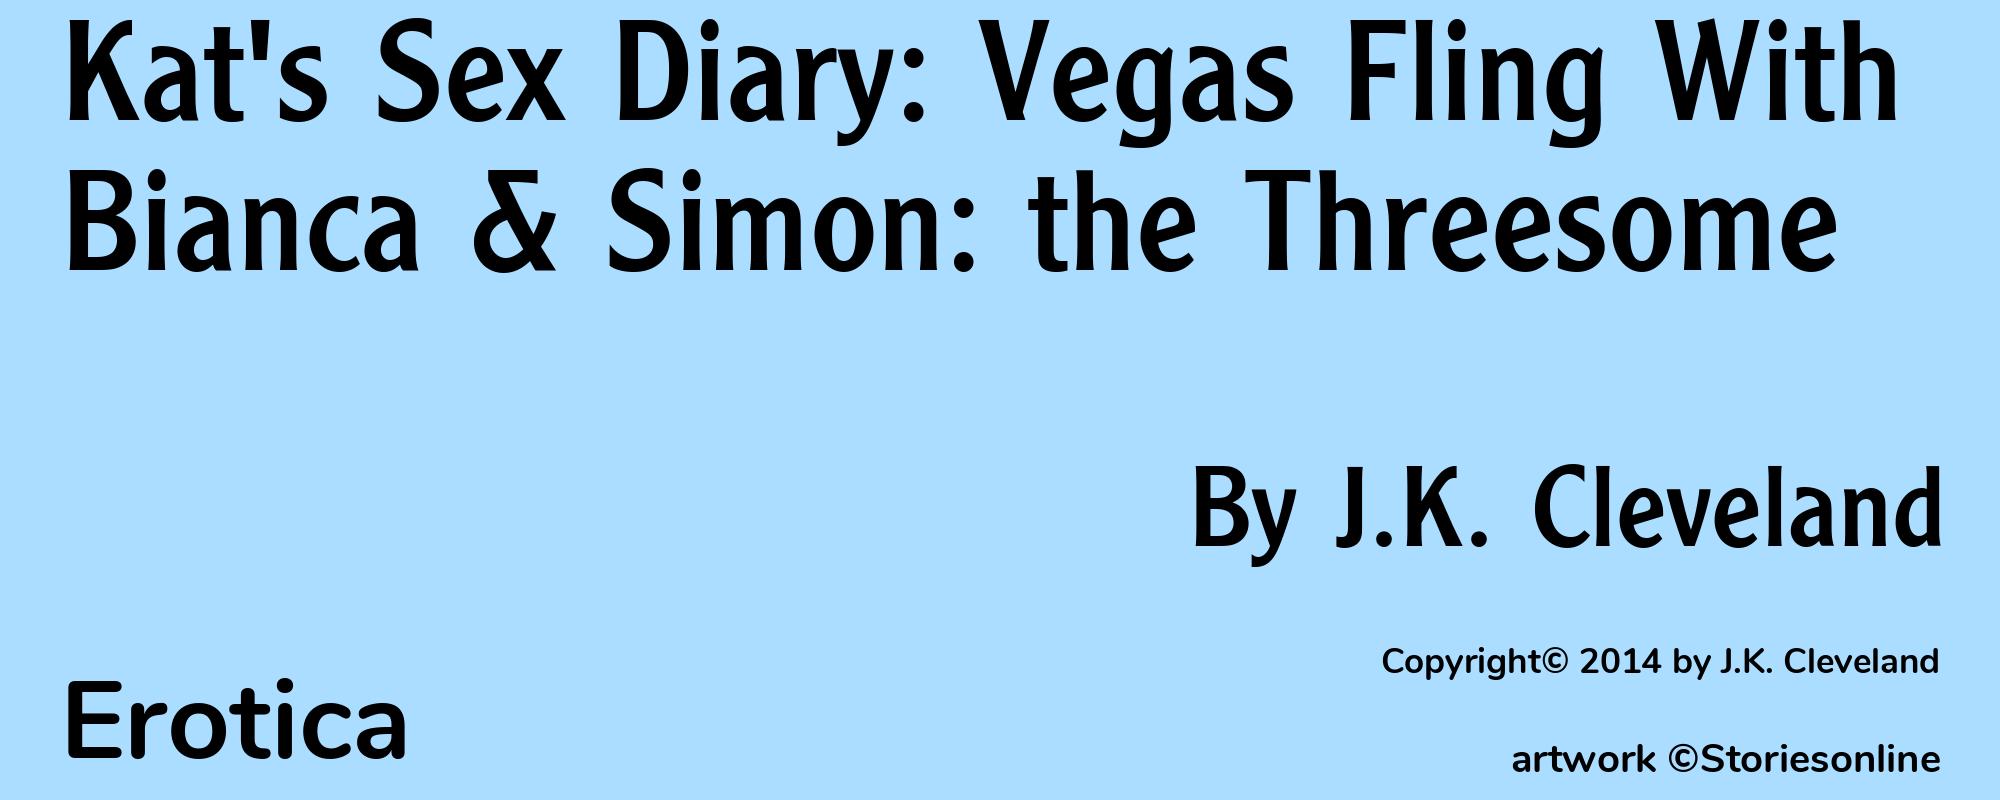 Kat's Sex Diary: Vegas Fling With Bianca & Simon: the Threesome - Cover